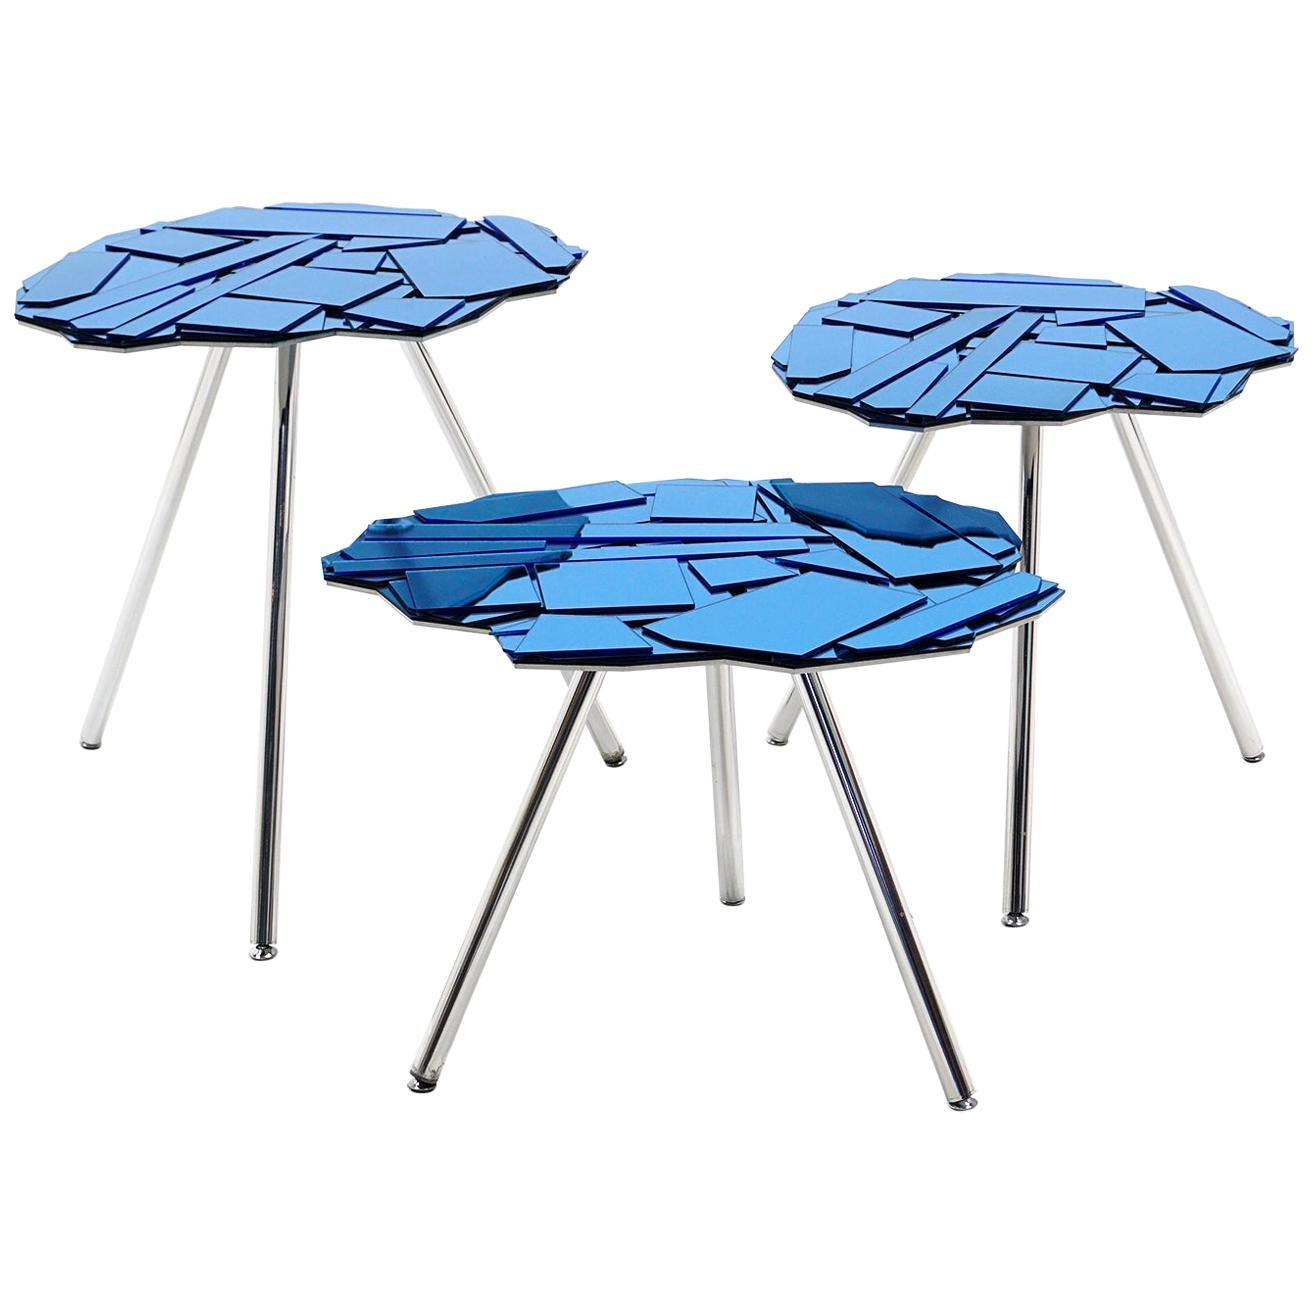 Brasilia Nesting Tables, Three, by The Campana Brothers, Blue Glass Tops, Chrome For Sale